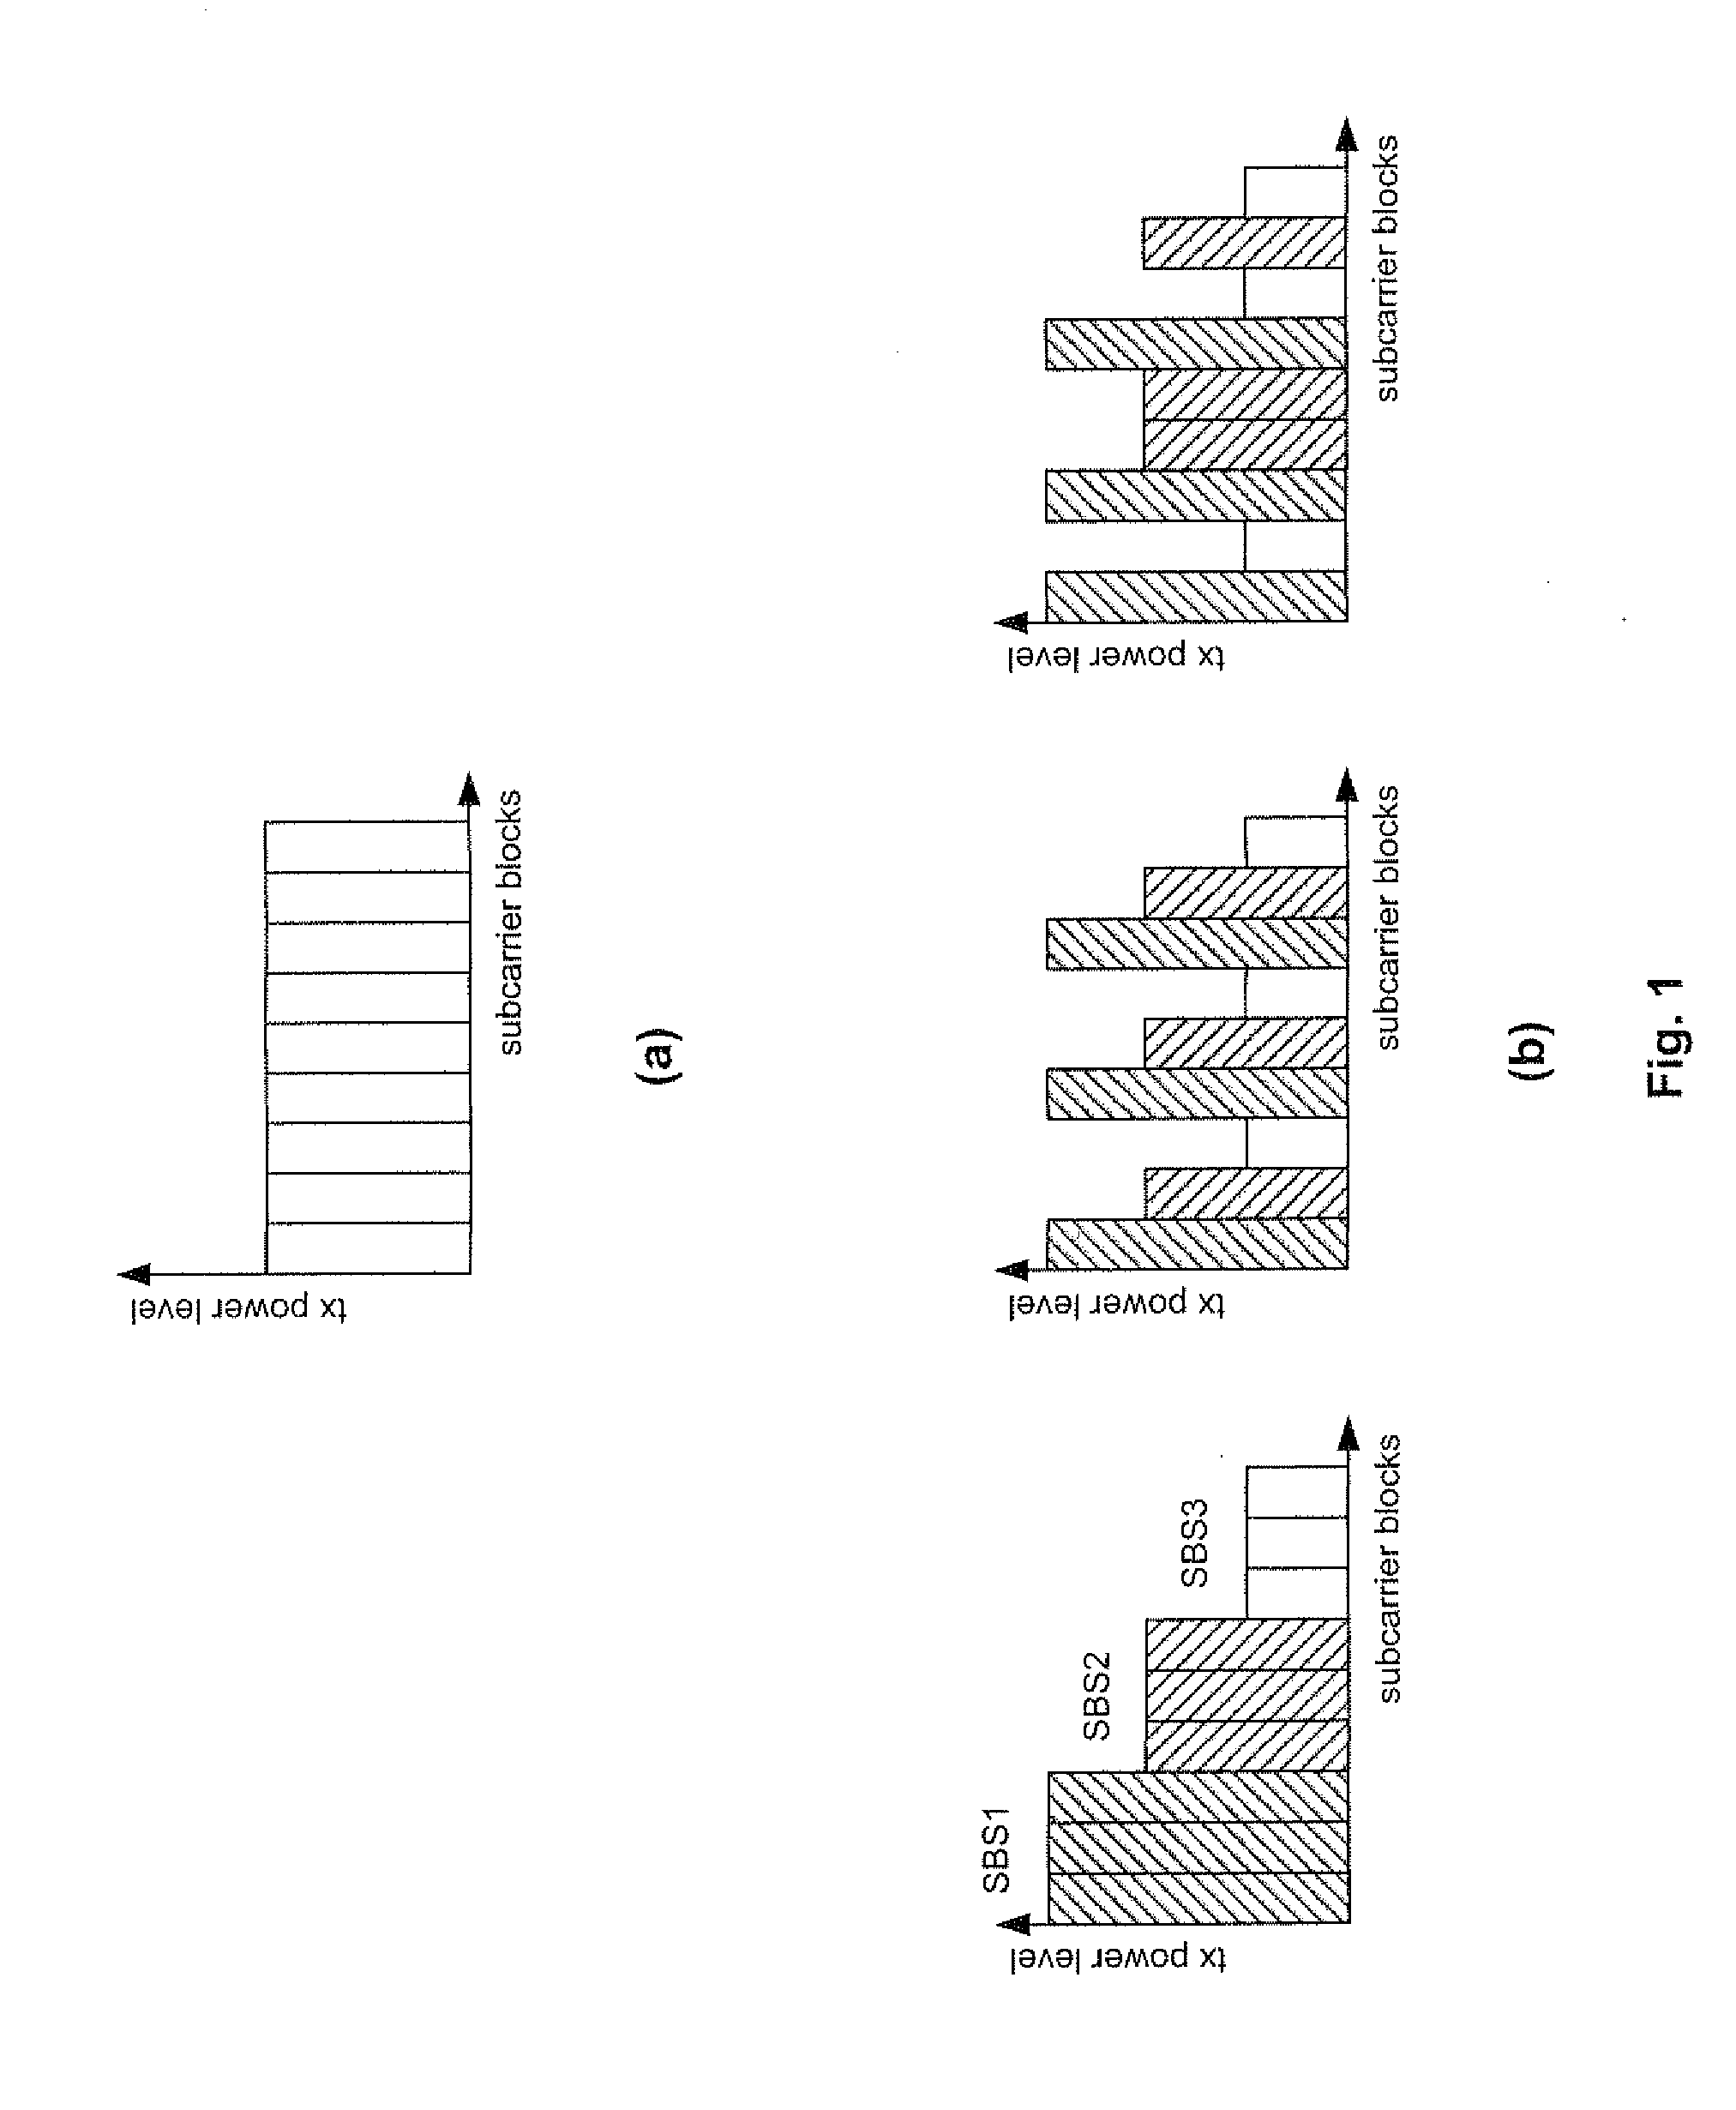 Interference balancing in a wireless communication system